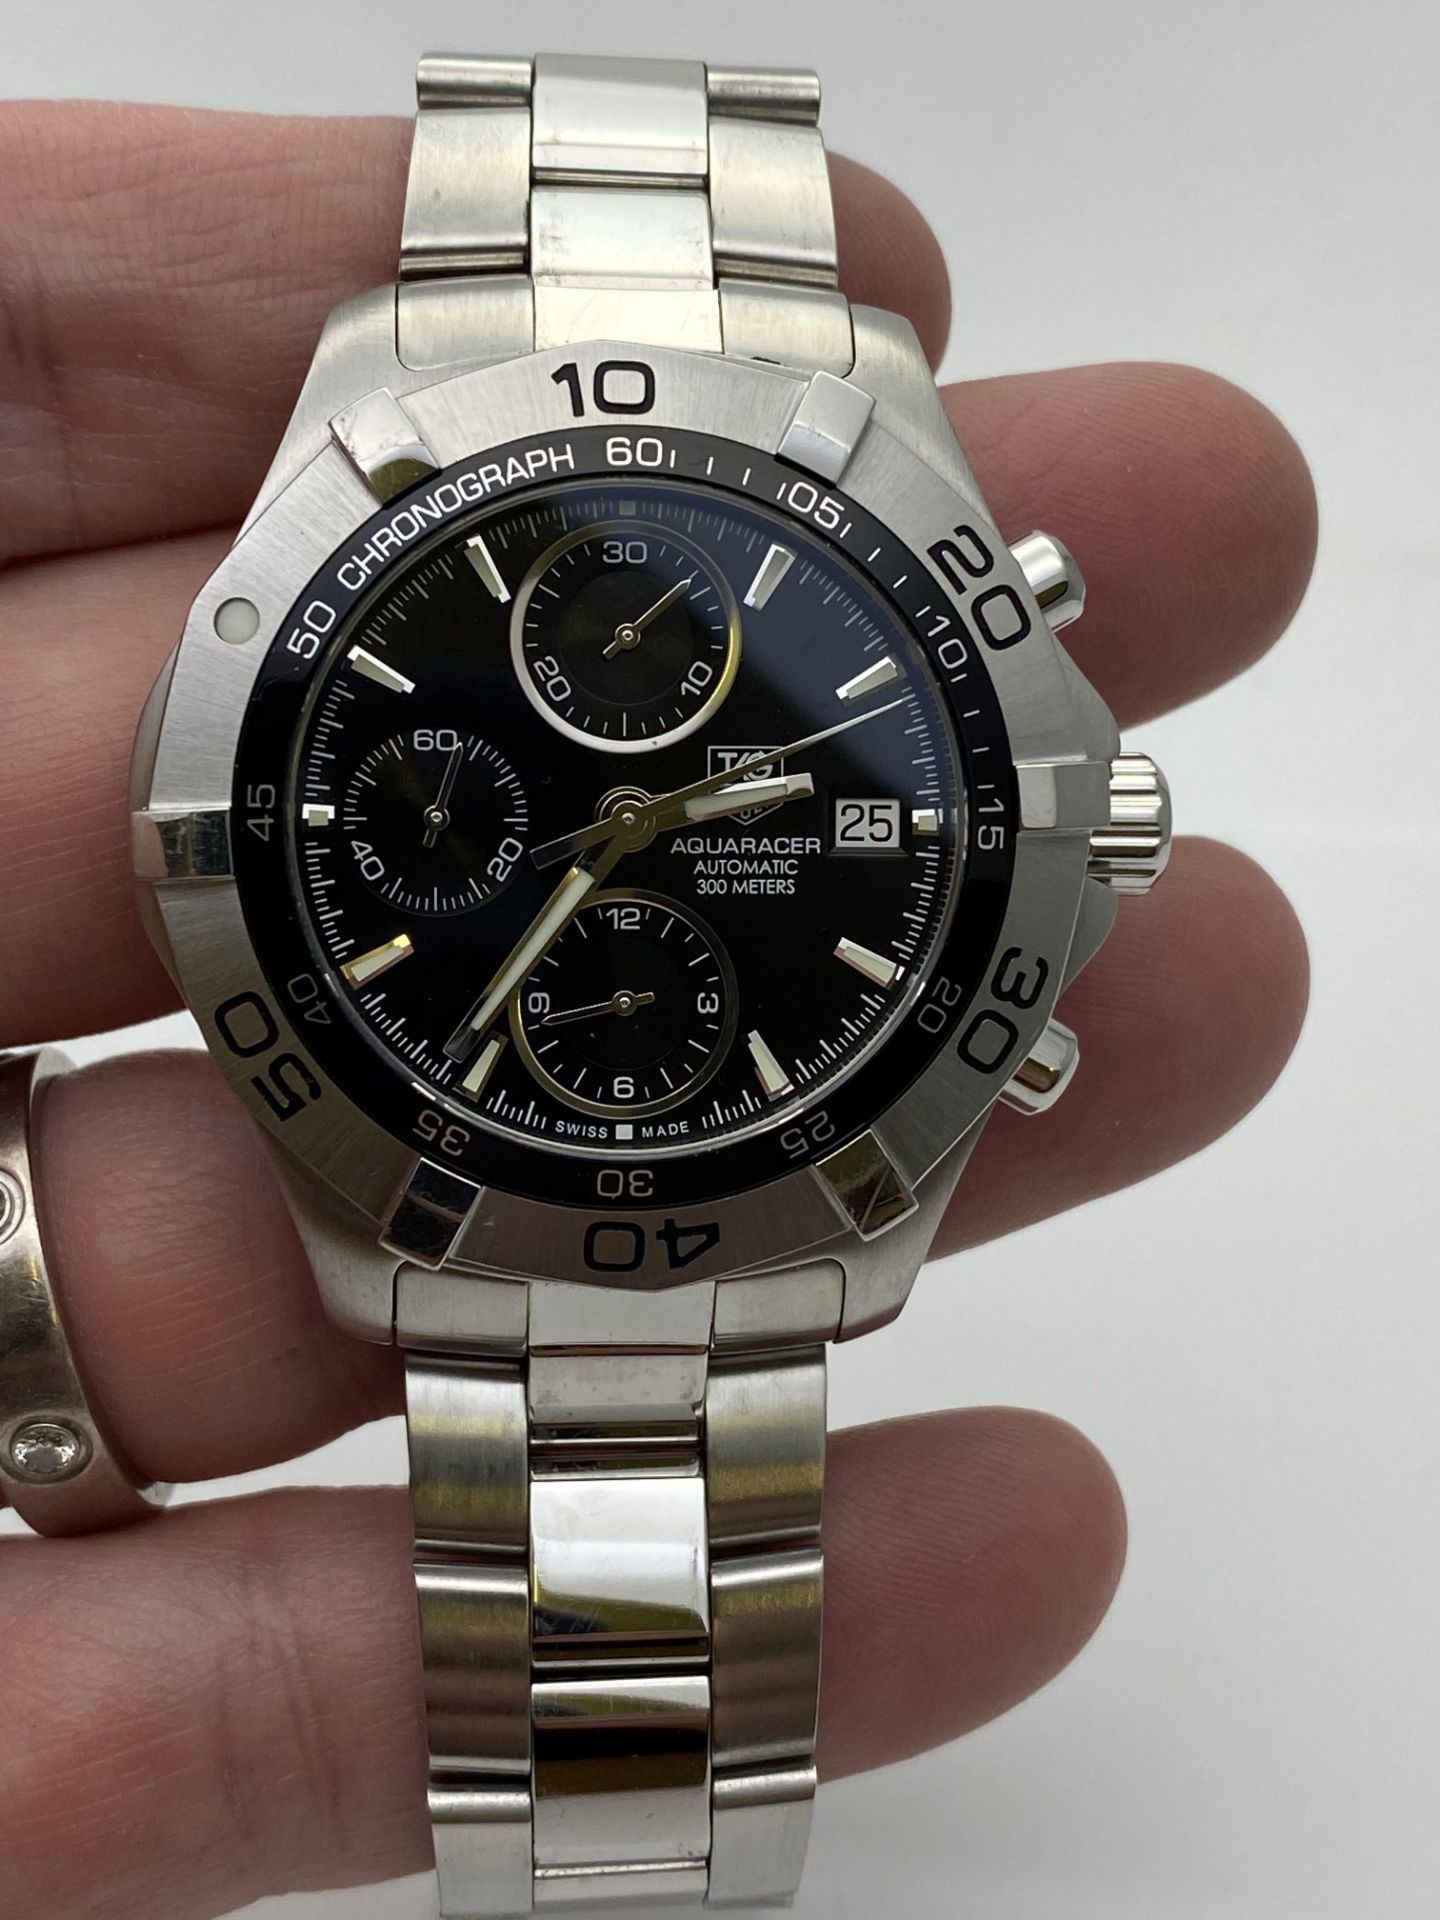 GENTS TAG HEUER STAINLESS STEEL WATCH, CHRONOMETER AUTOMATIC, MODEL- CAF2110, NO BOX, NO PAPERS, - Image 2 of 4